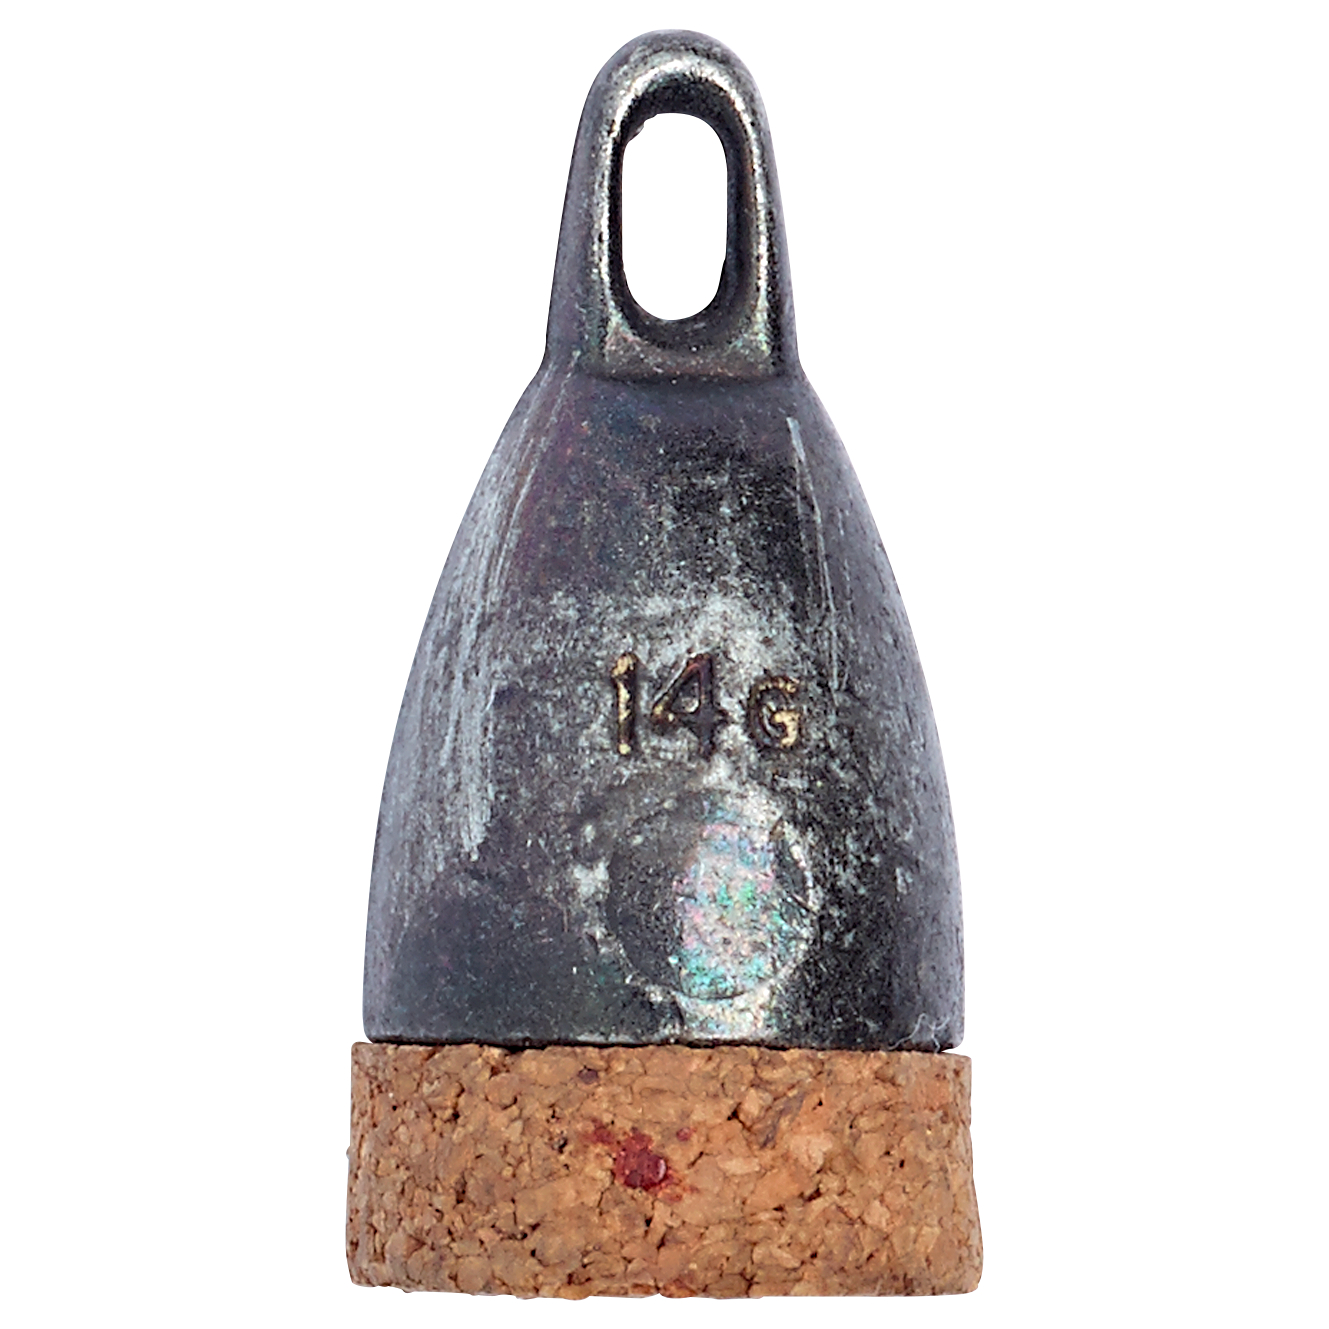 Kogha Plumb bob with cork insert at low prices